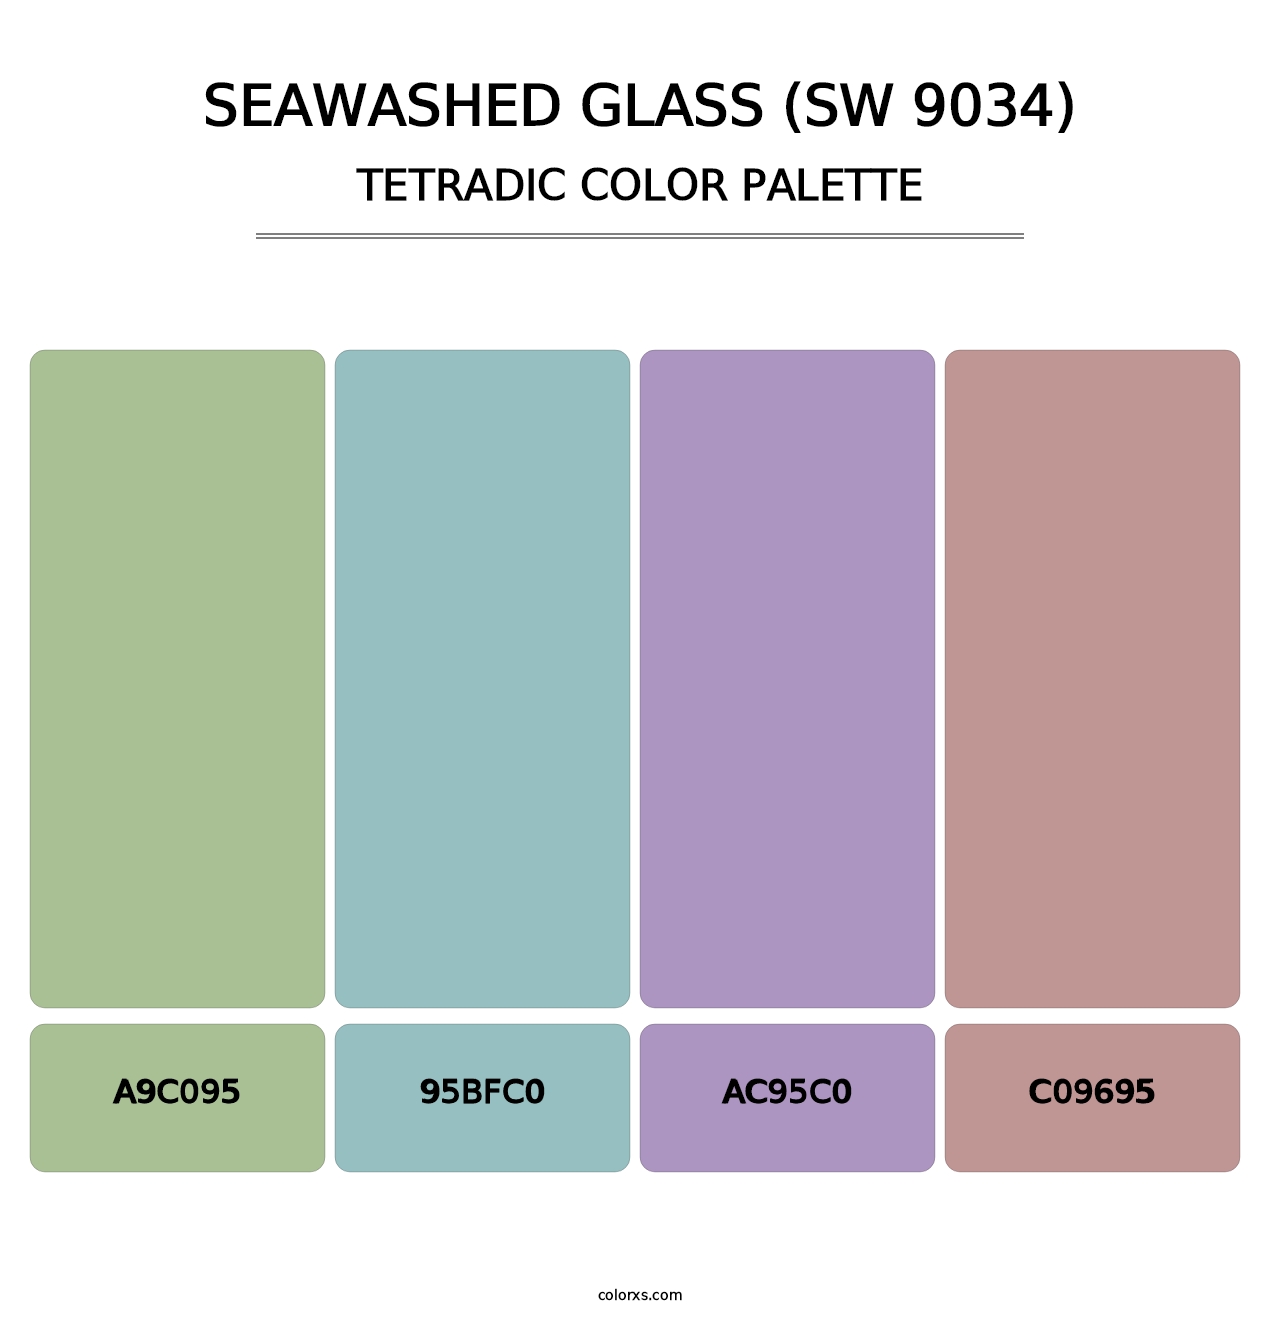 Seawashed Glass (SW 9034) - Tetradic Color Palette